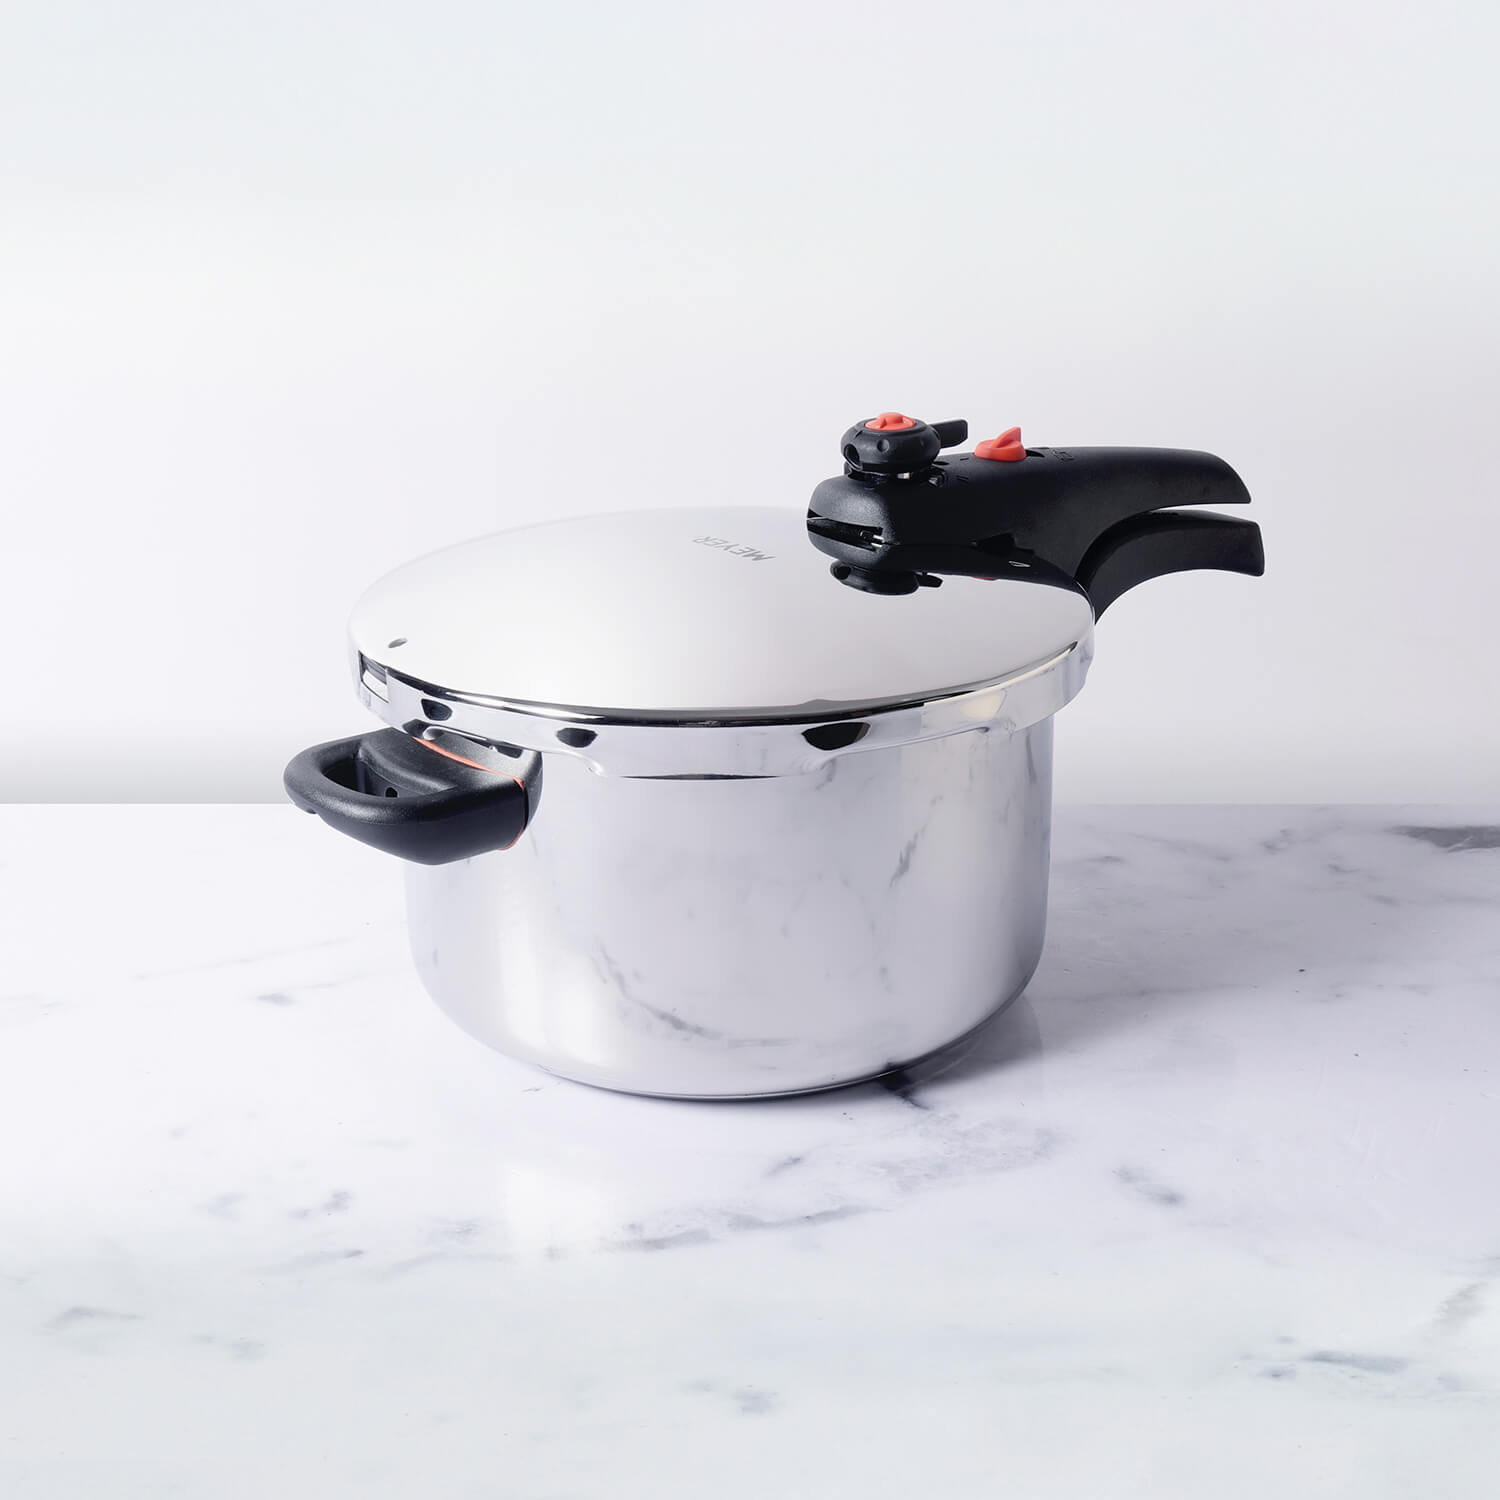 Meyer Presta Stainless Steel Dual Pressure Cooker, 4L - Pots and Pans